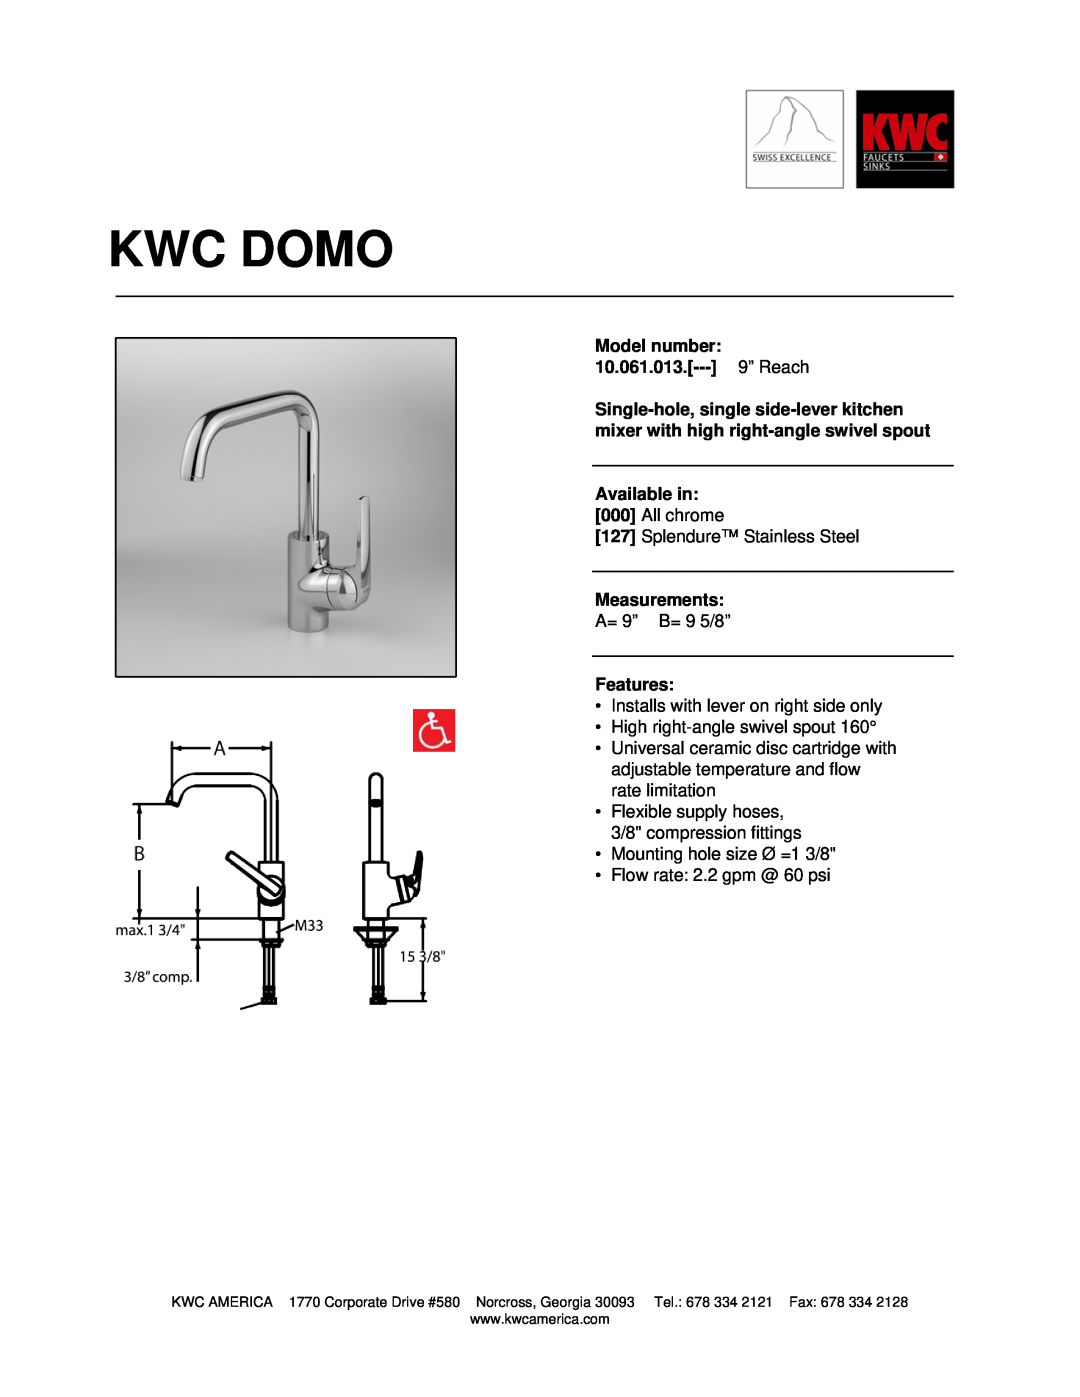 KWC manual Kwc Domo, Model number 10.061.013.--- 9” Reach, Available in, Measurements, Features 